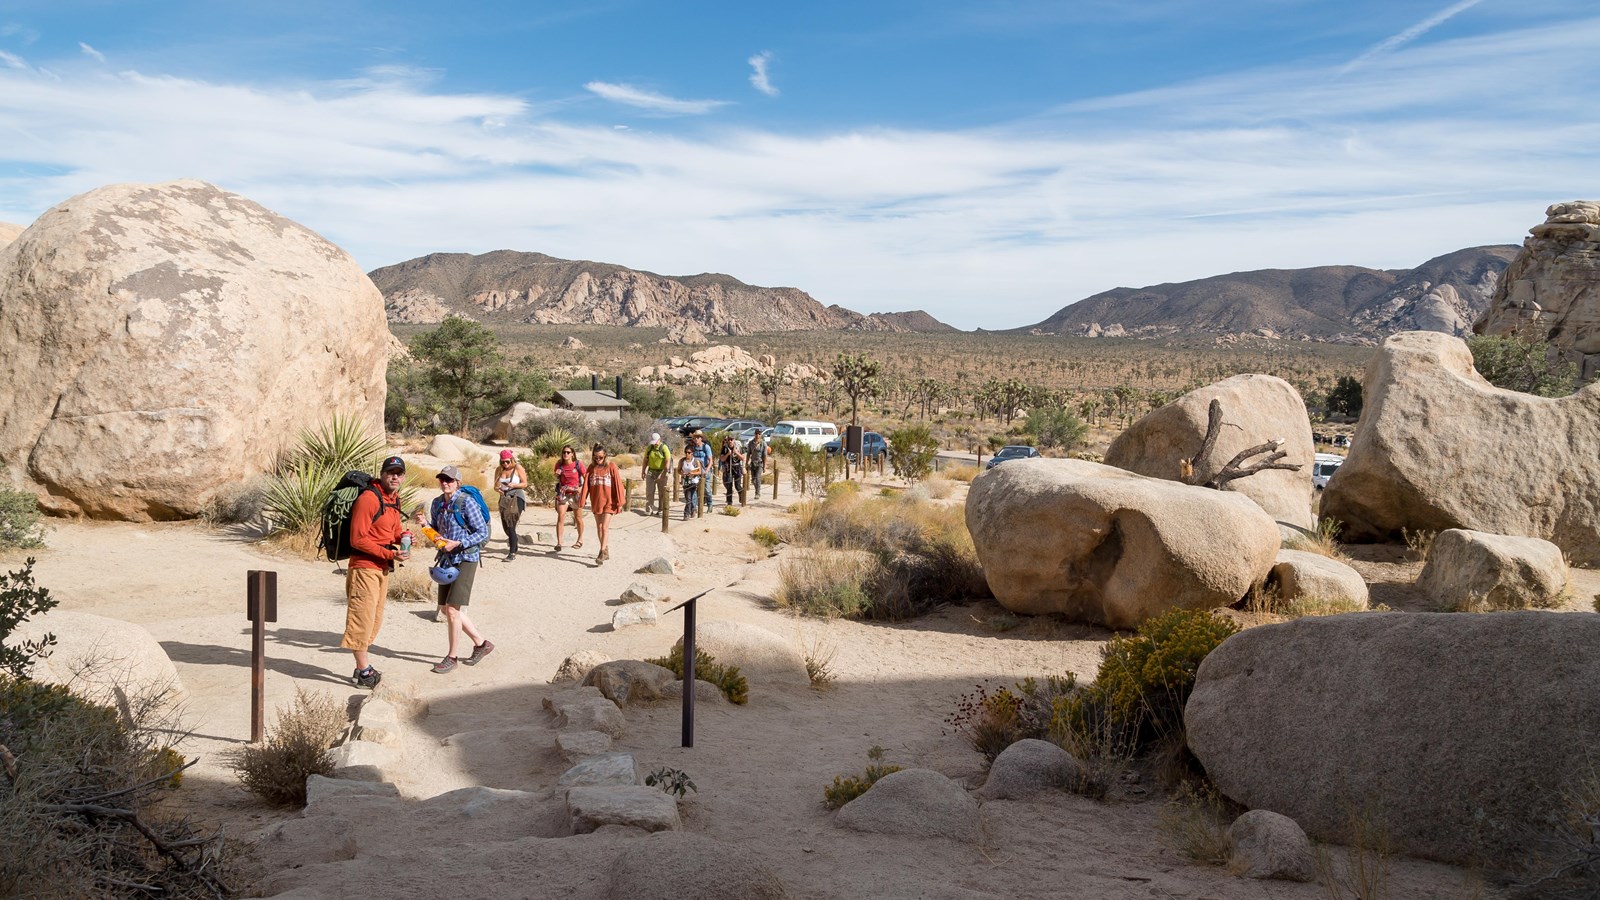 A group of hikers heading up a dirt trail between large rocks with mountains in the background.